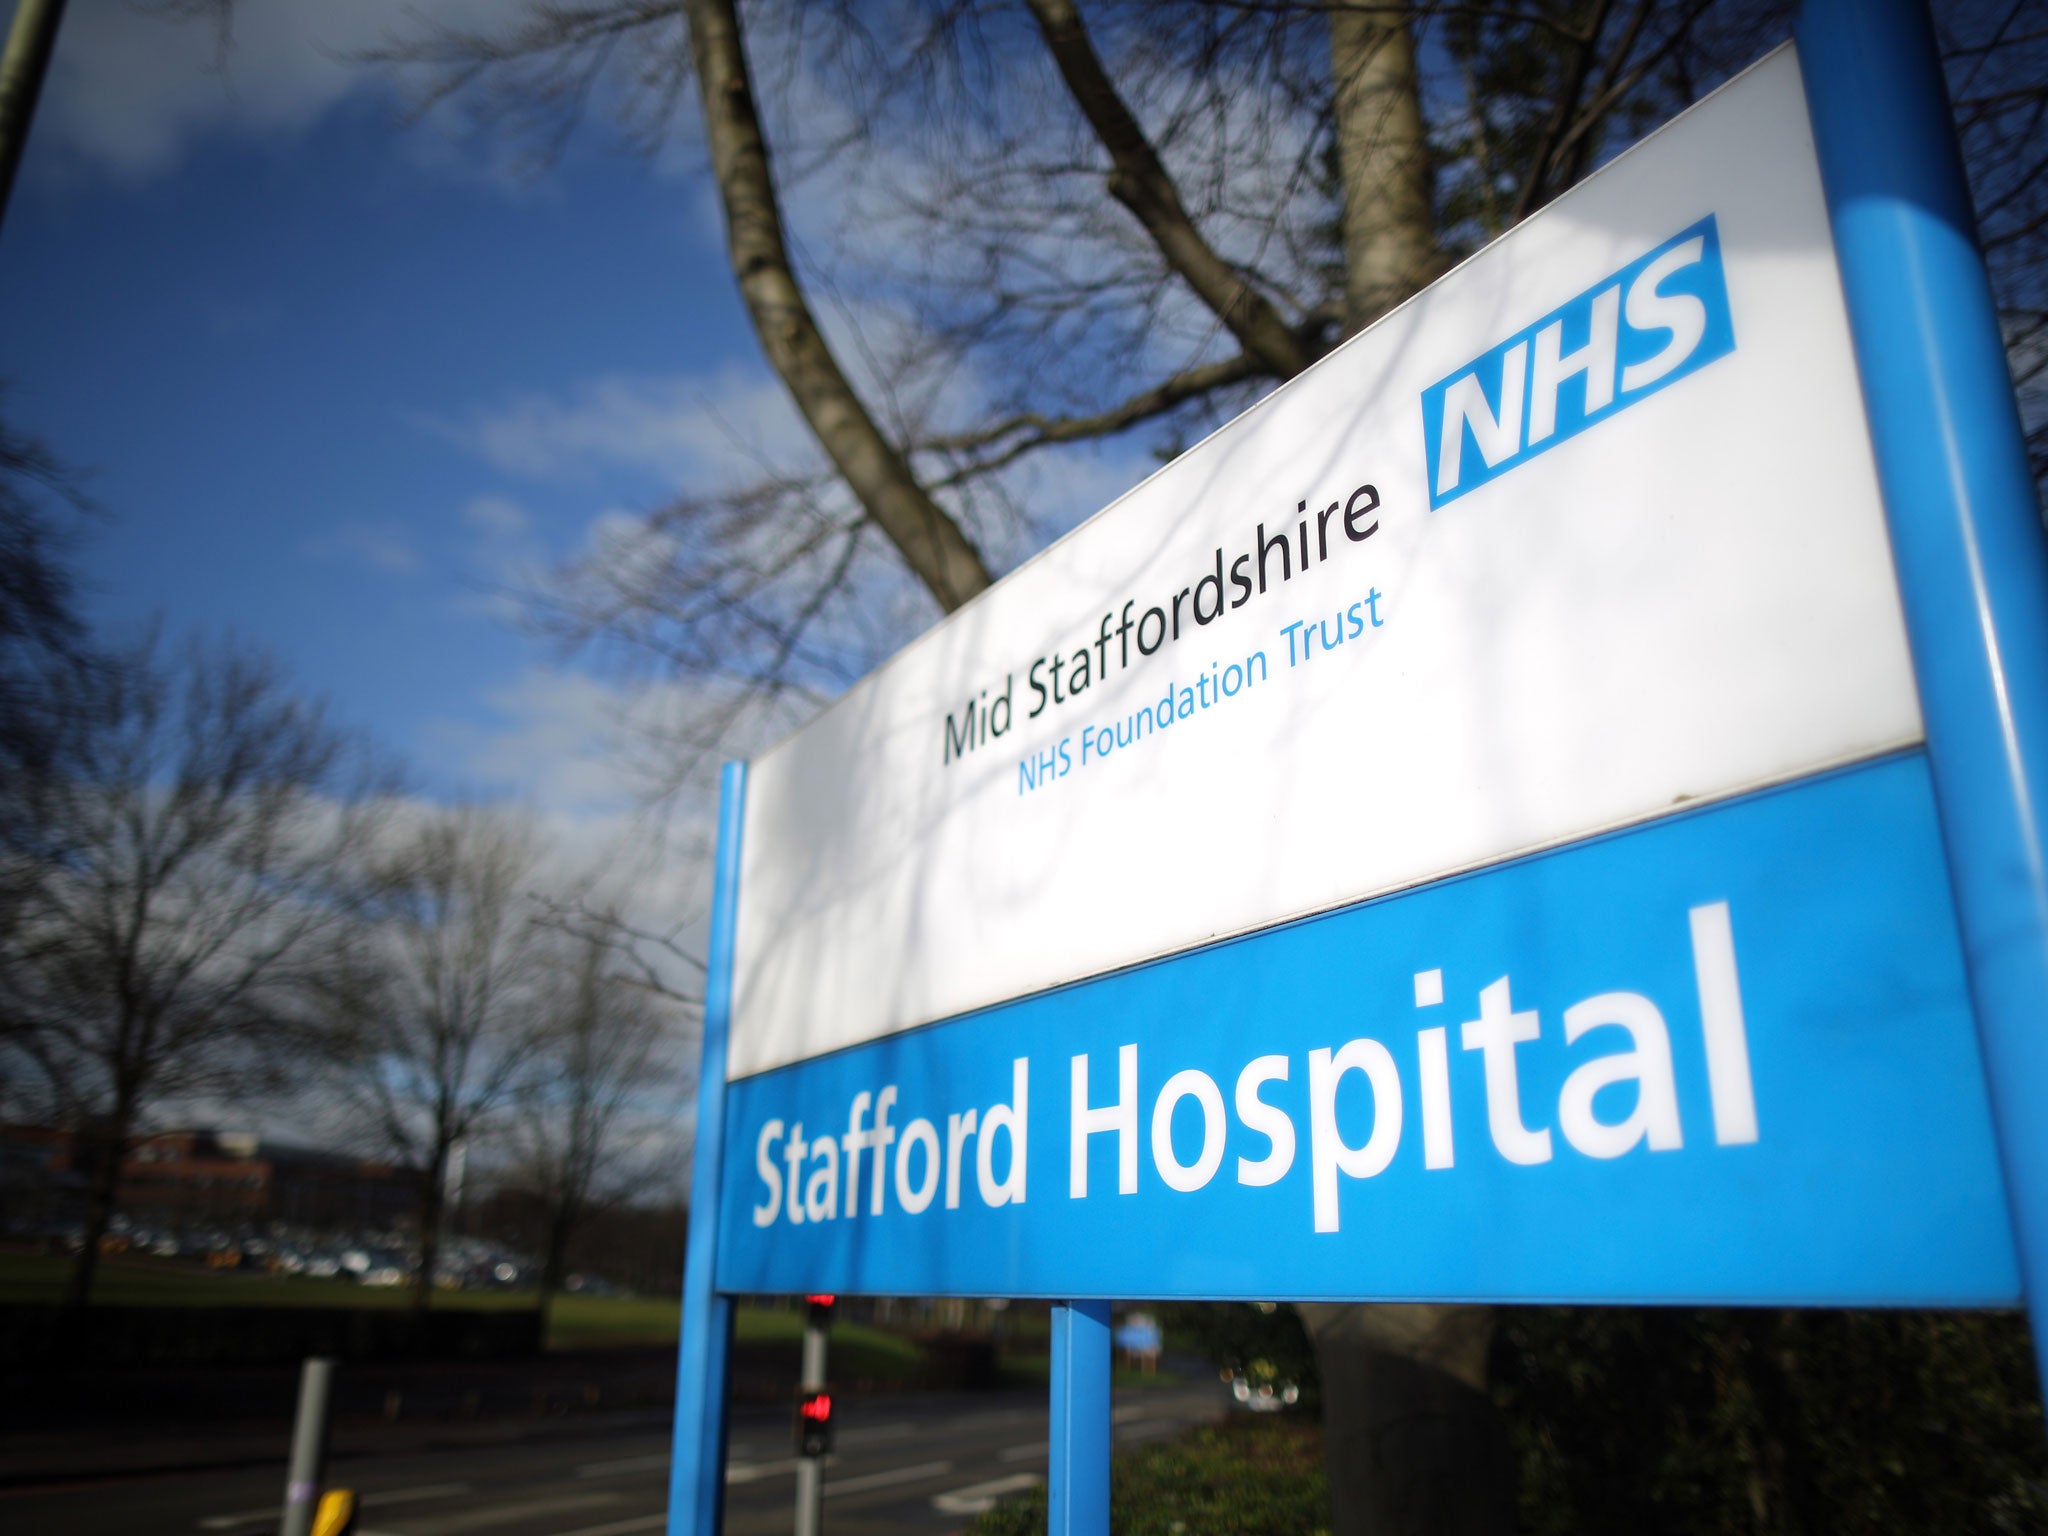 The former director of nursing at the scandal-hit Stafford Hospital has told a disciplinary hearing that the word 'nursing' in her job title was 'misleading'